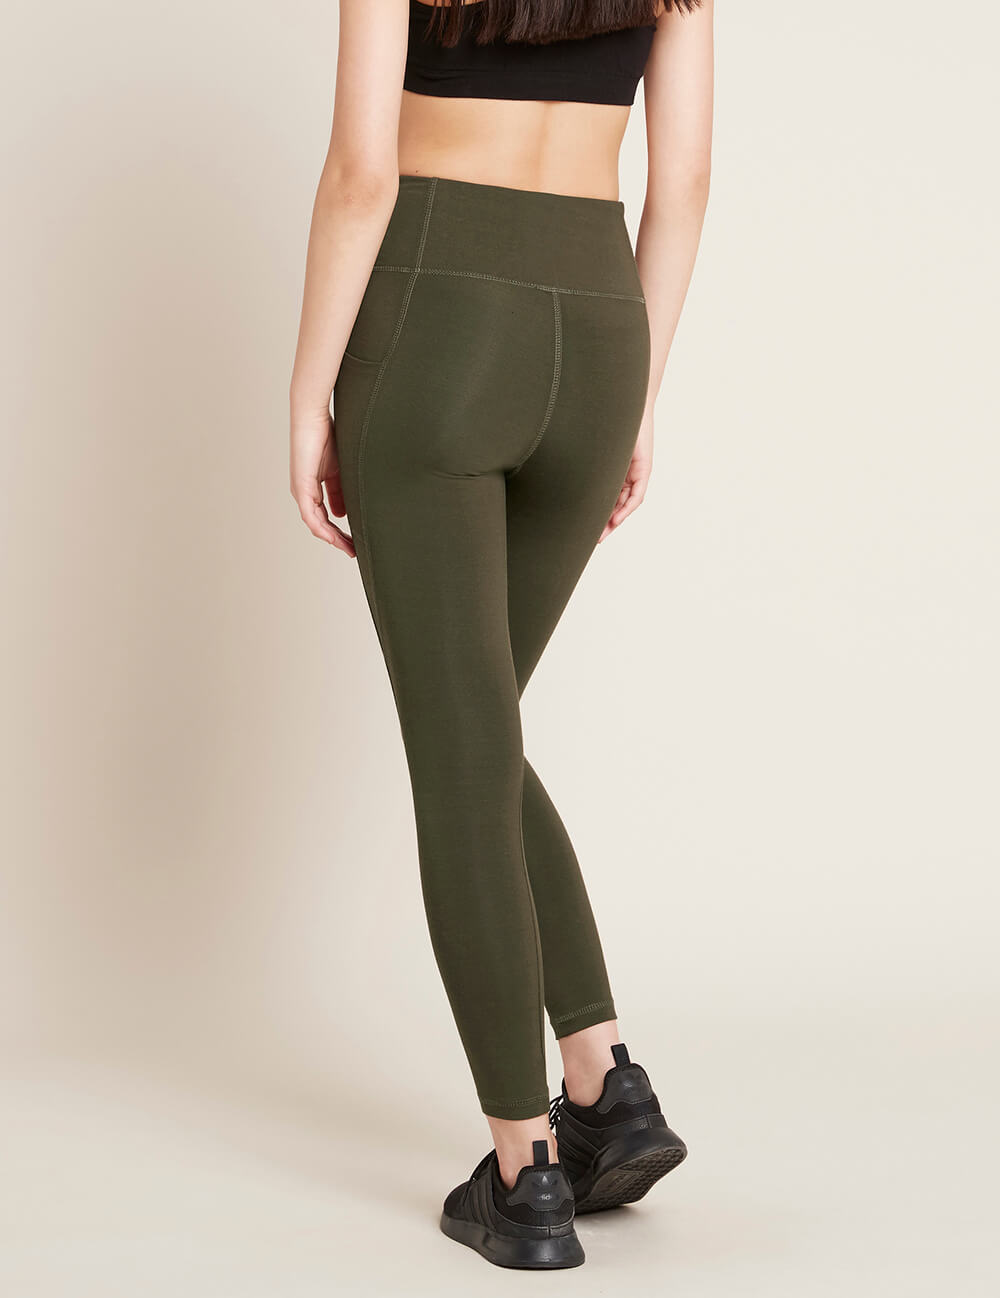 Boody Bamboo Organic Cotton Active Blended High-Waisted Full Leggings with Pocket in Dark Green Olive Rear View